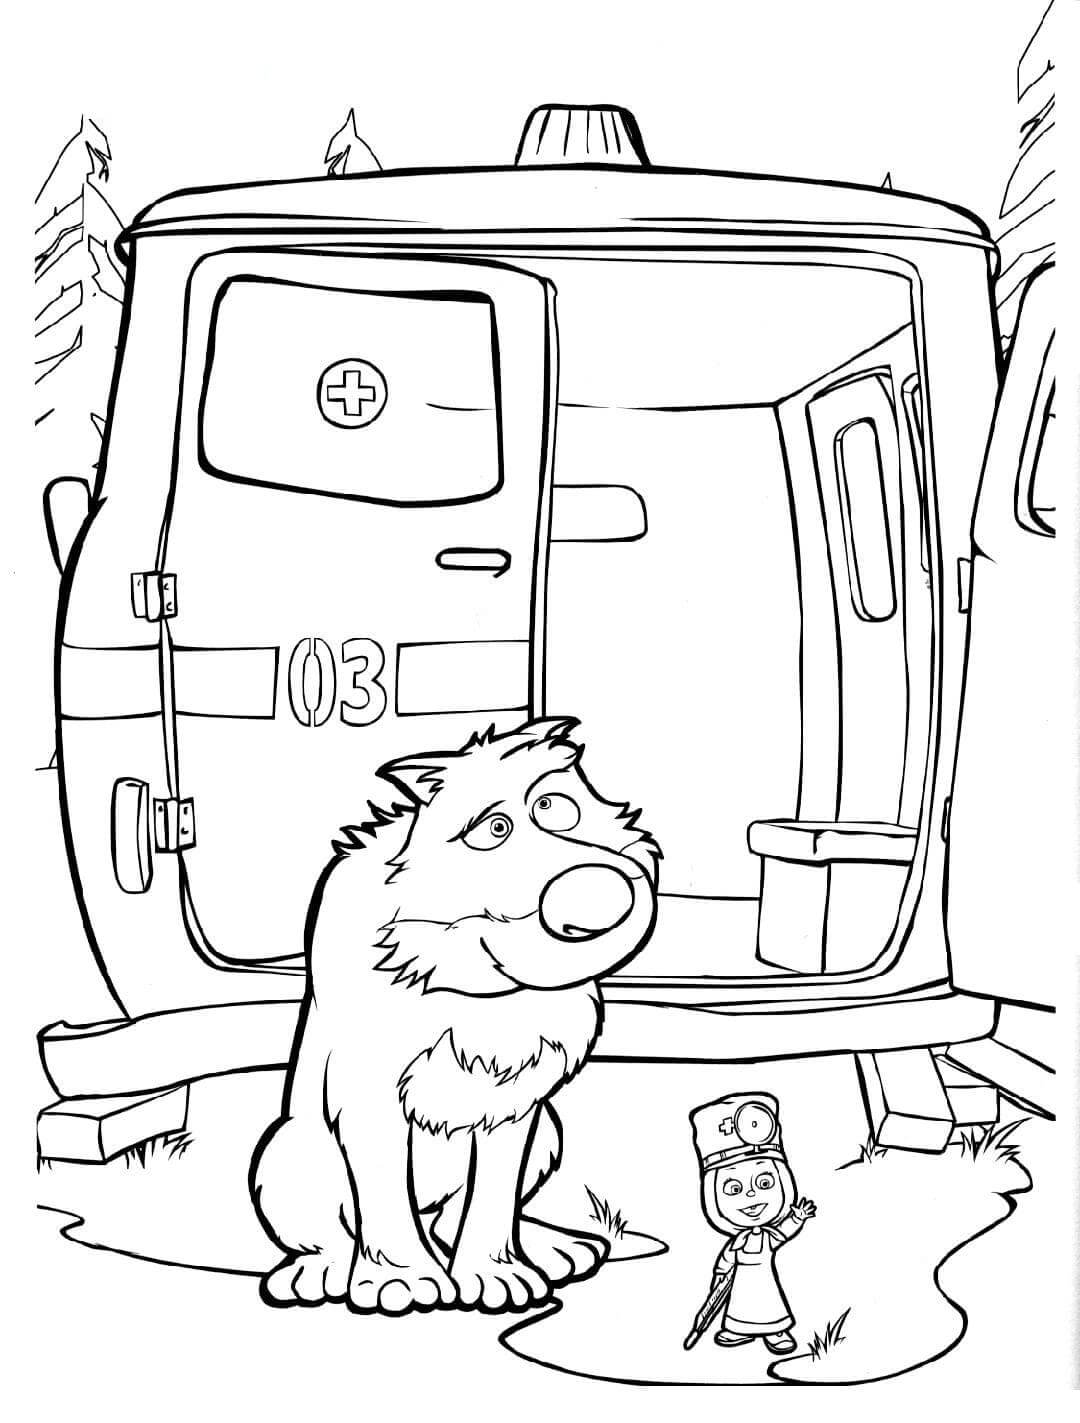 Masha and wolf Coloring Page